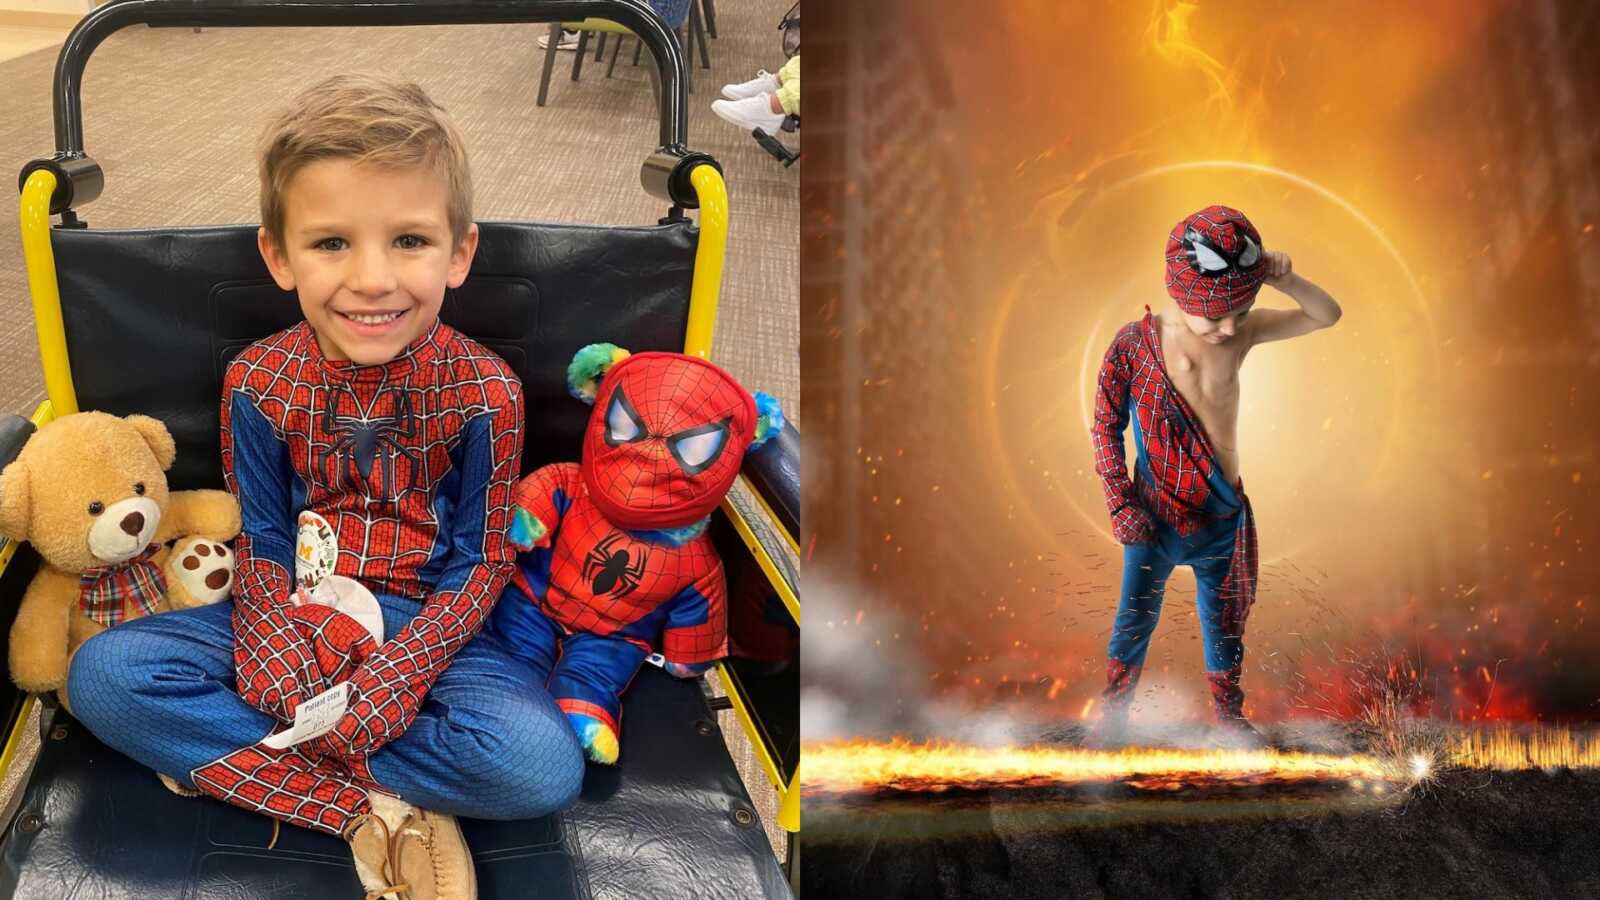 Young boy with cancer poses in Spider Man costume